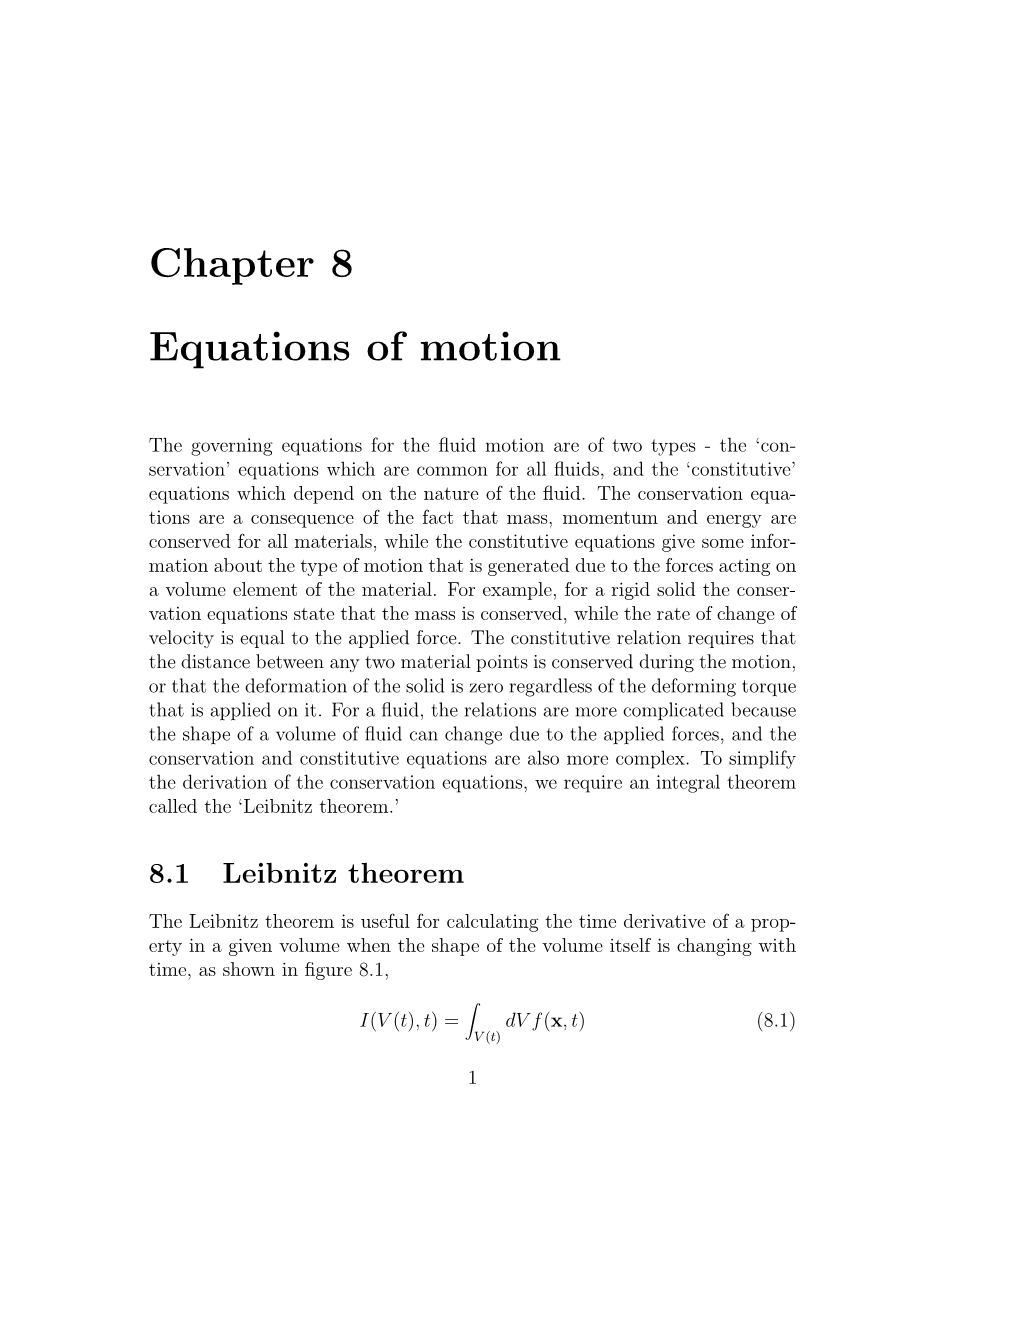 Chapter 8 Equations of Motion